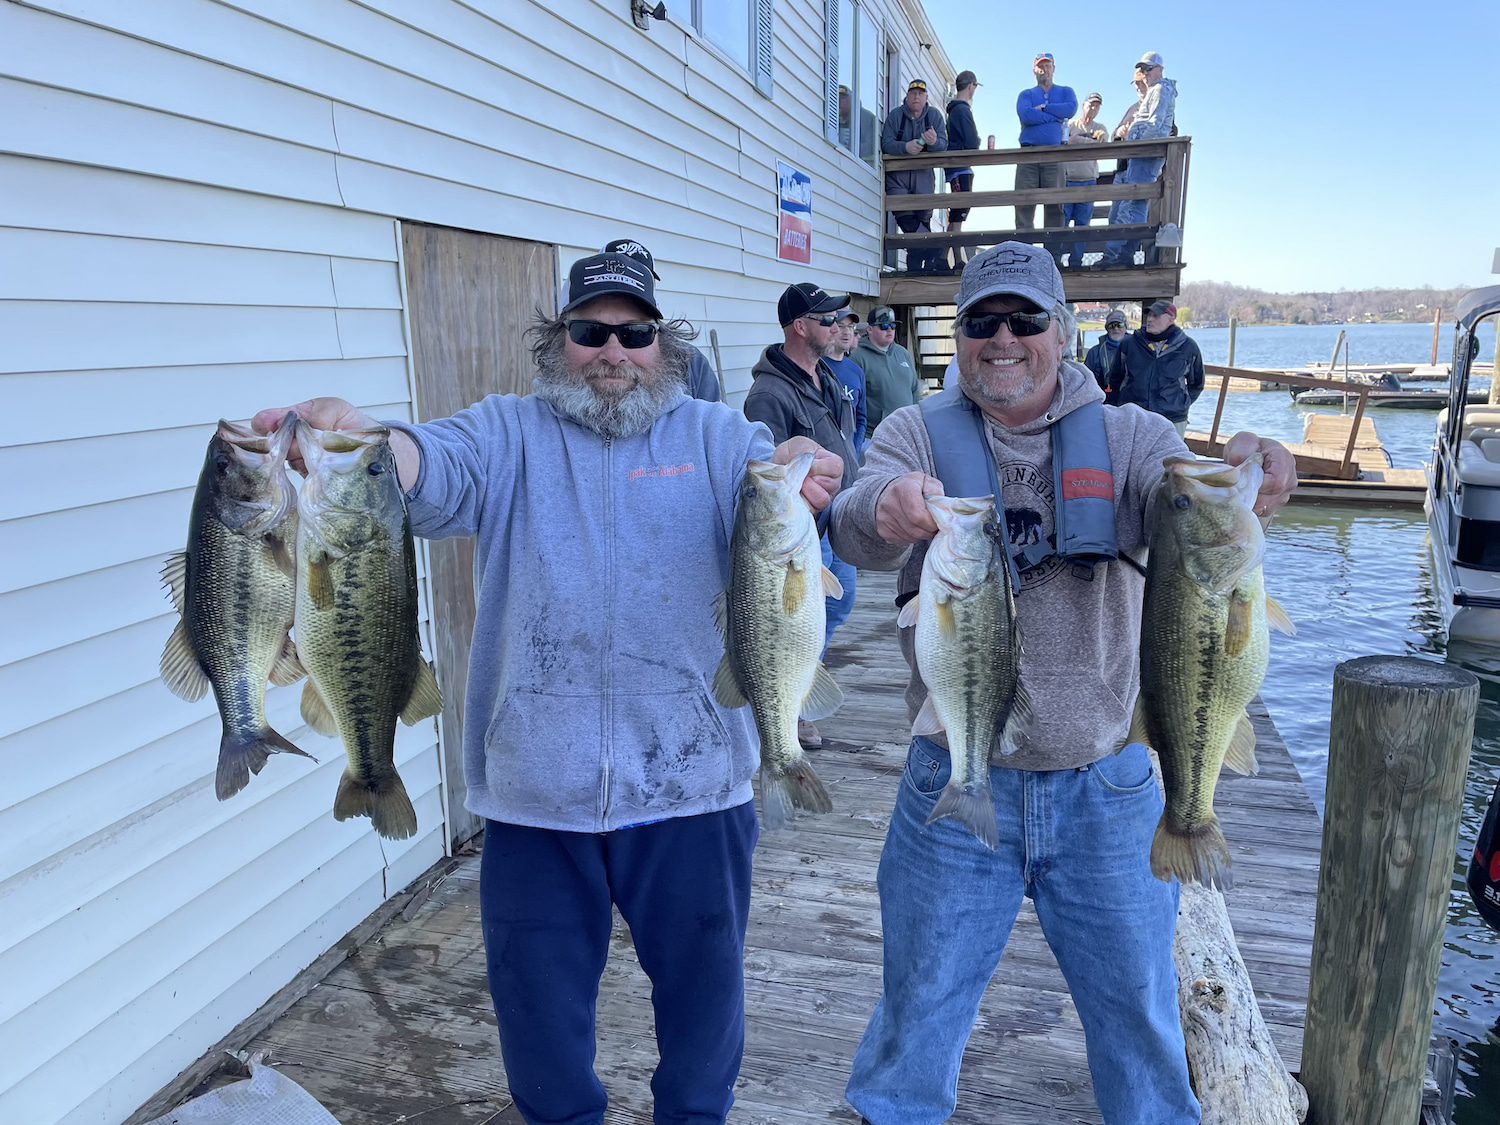 Greg Stallings & Ricky Grant Win Captains Quarters Open on SML March 21,2021 with 24.68lbs